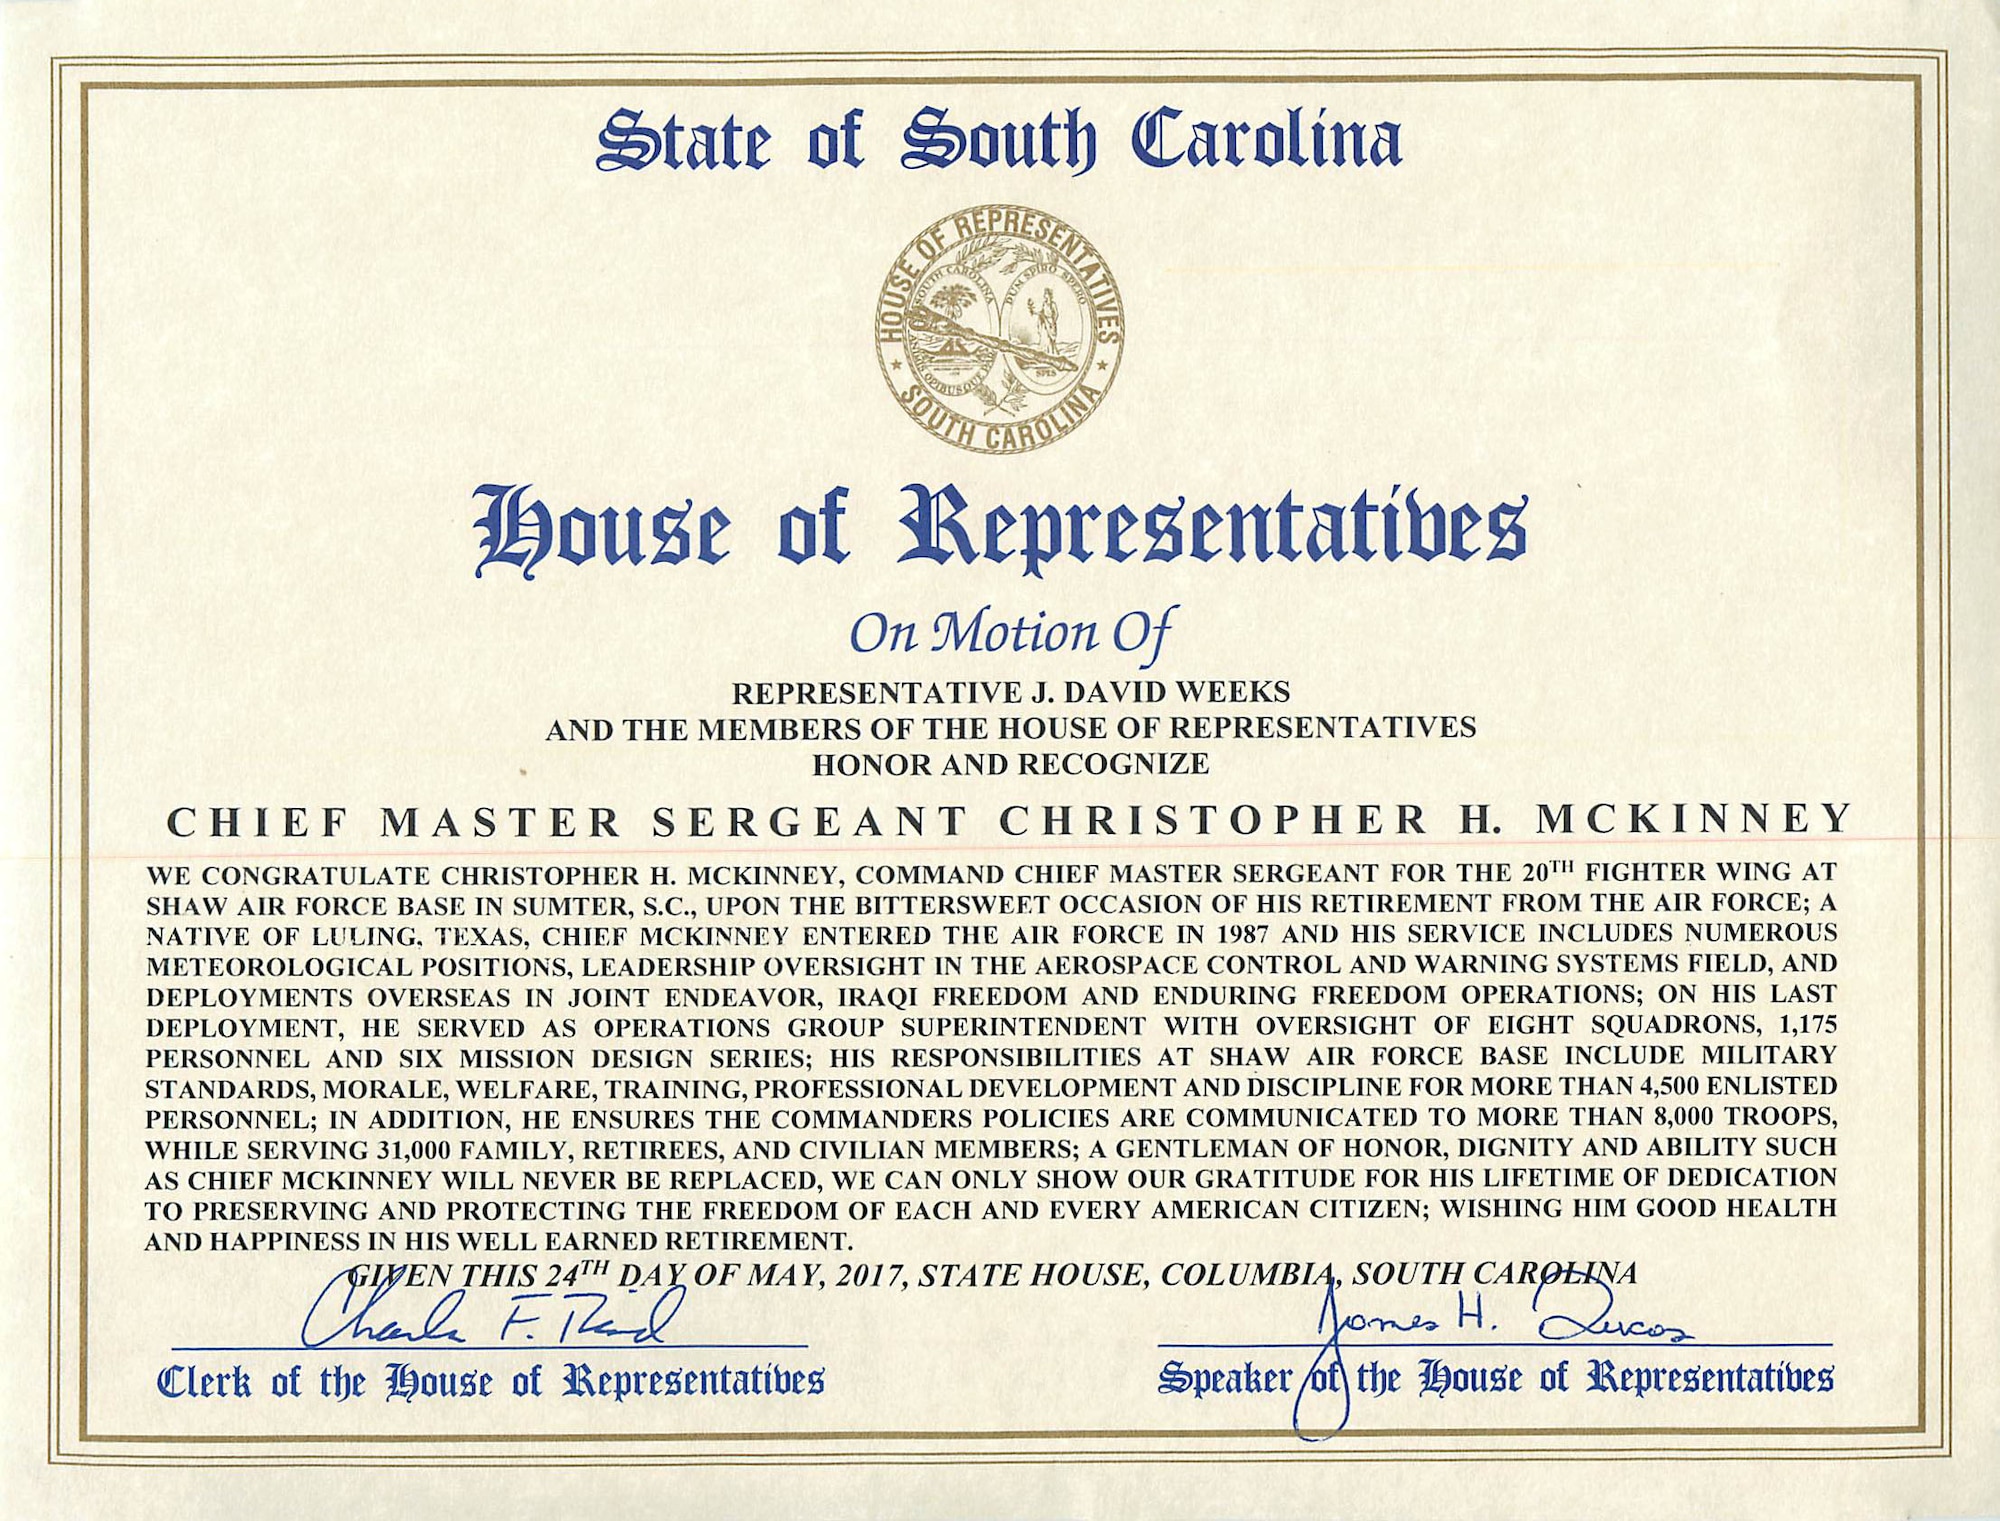 A certificate of recognition from the South Carolina House of Representatives was presented to Chief Master Sgt. Christopher McKinney, former 20th Fighter Wing command chief, at Shaw Air Force Base, S.C., May 24, 2017. The certificate summarized McKinney’s career and detailed his role at the 20th Fighter Wing. (Courtesy photo)